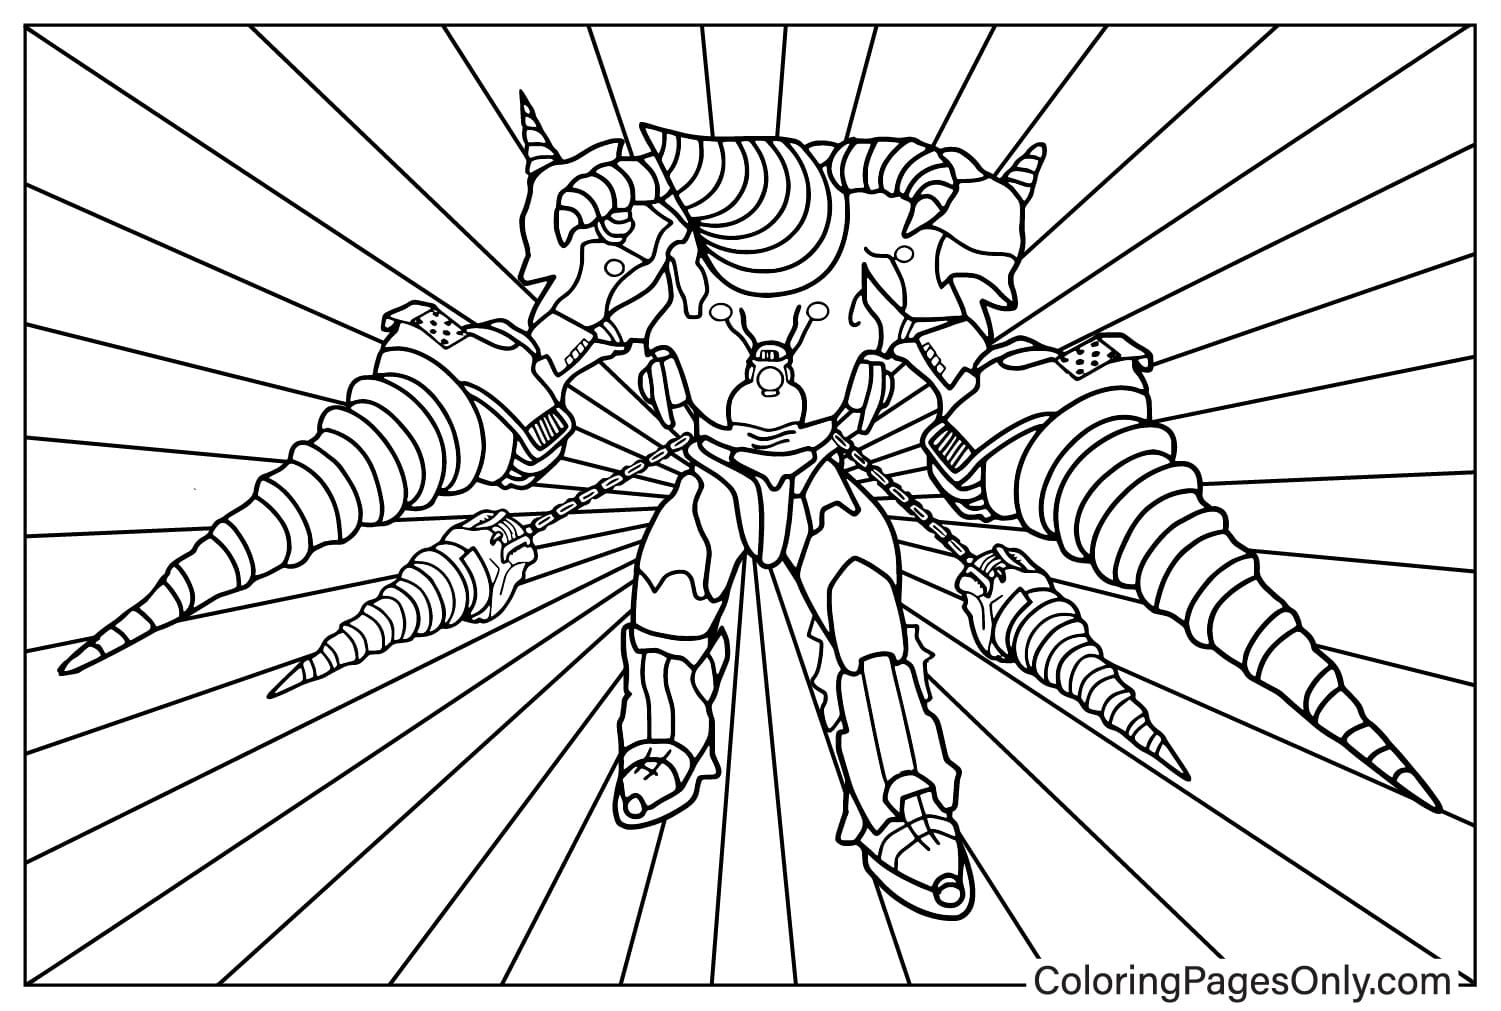 Coloring Page Upgraded Titan Drill Man from Upgraded Titan Drill Man